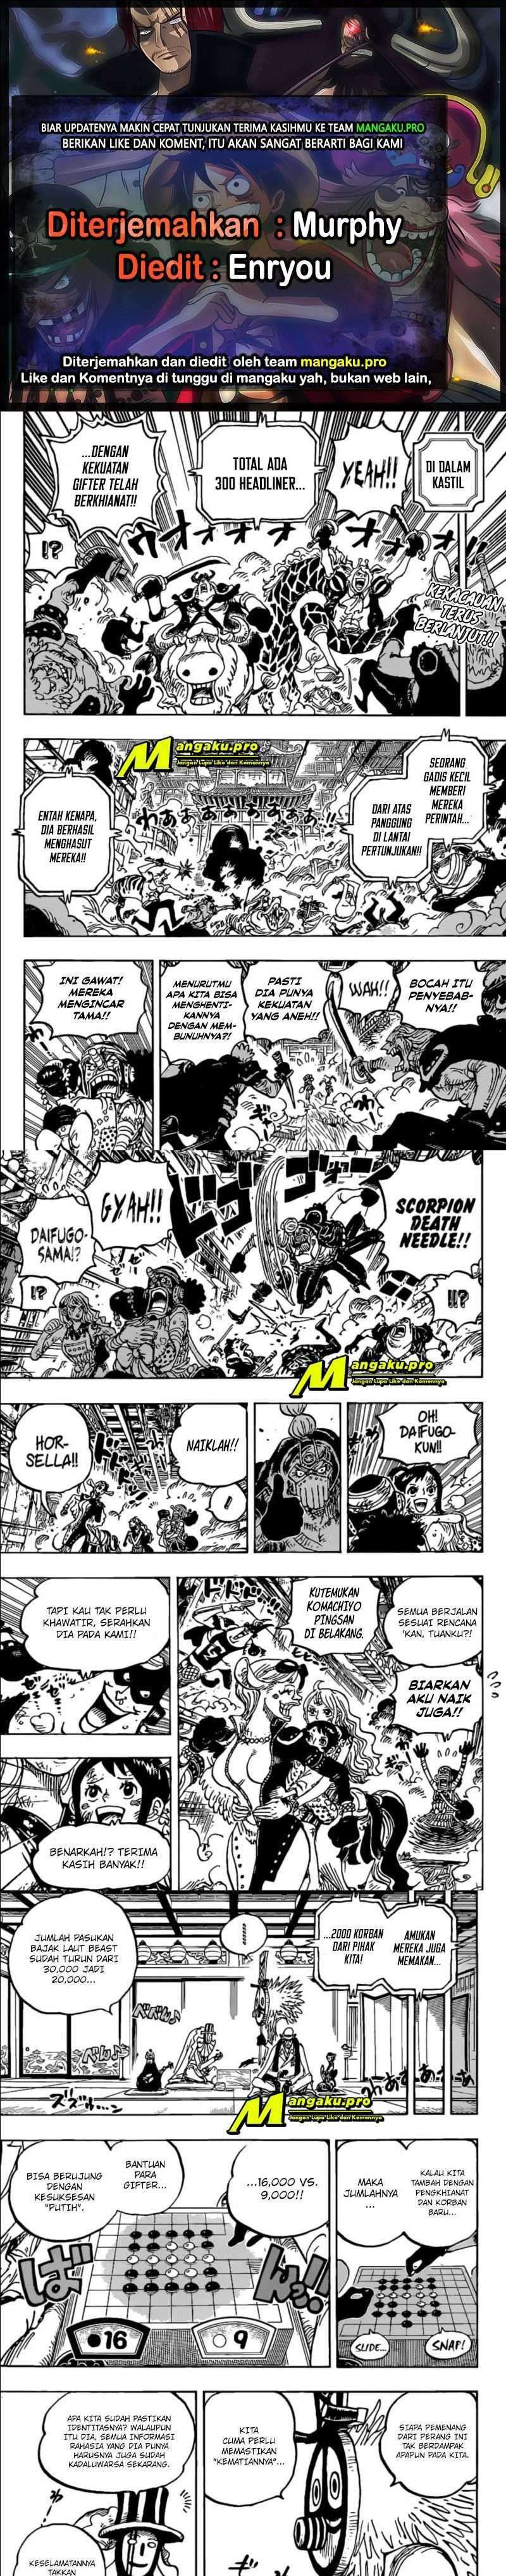 One Piece Chapter 1018 hq